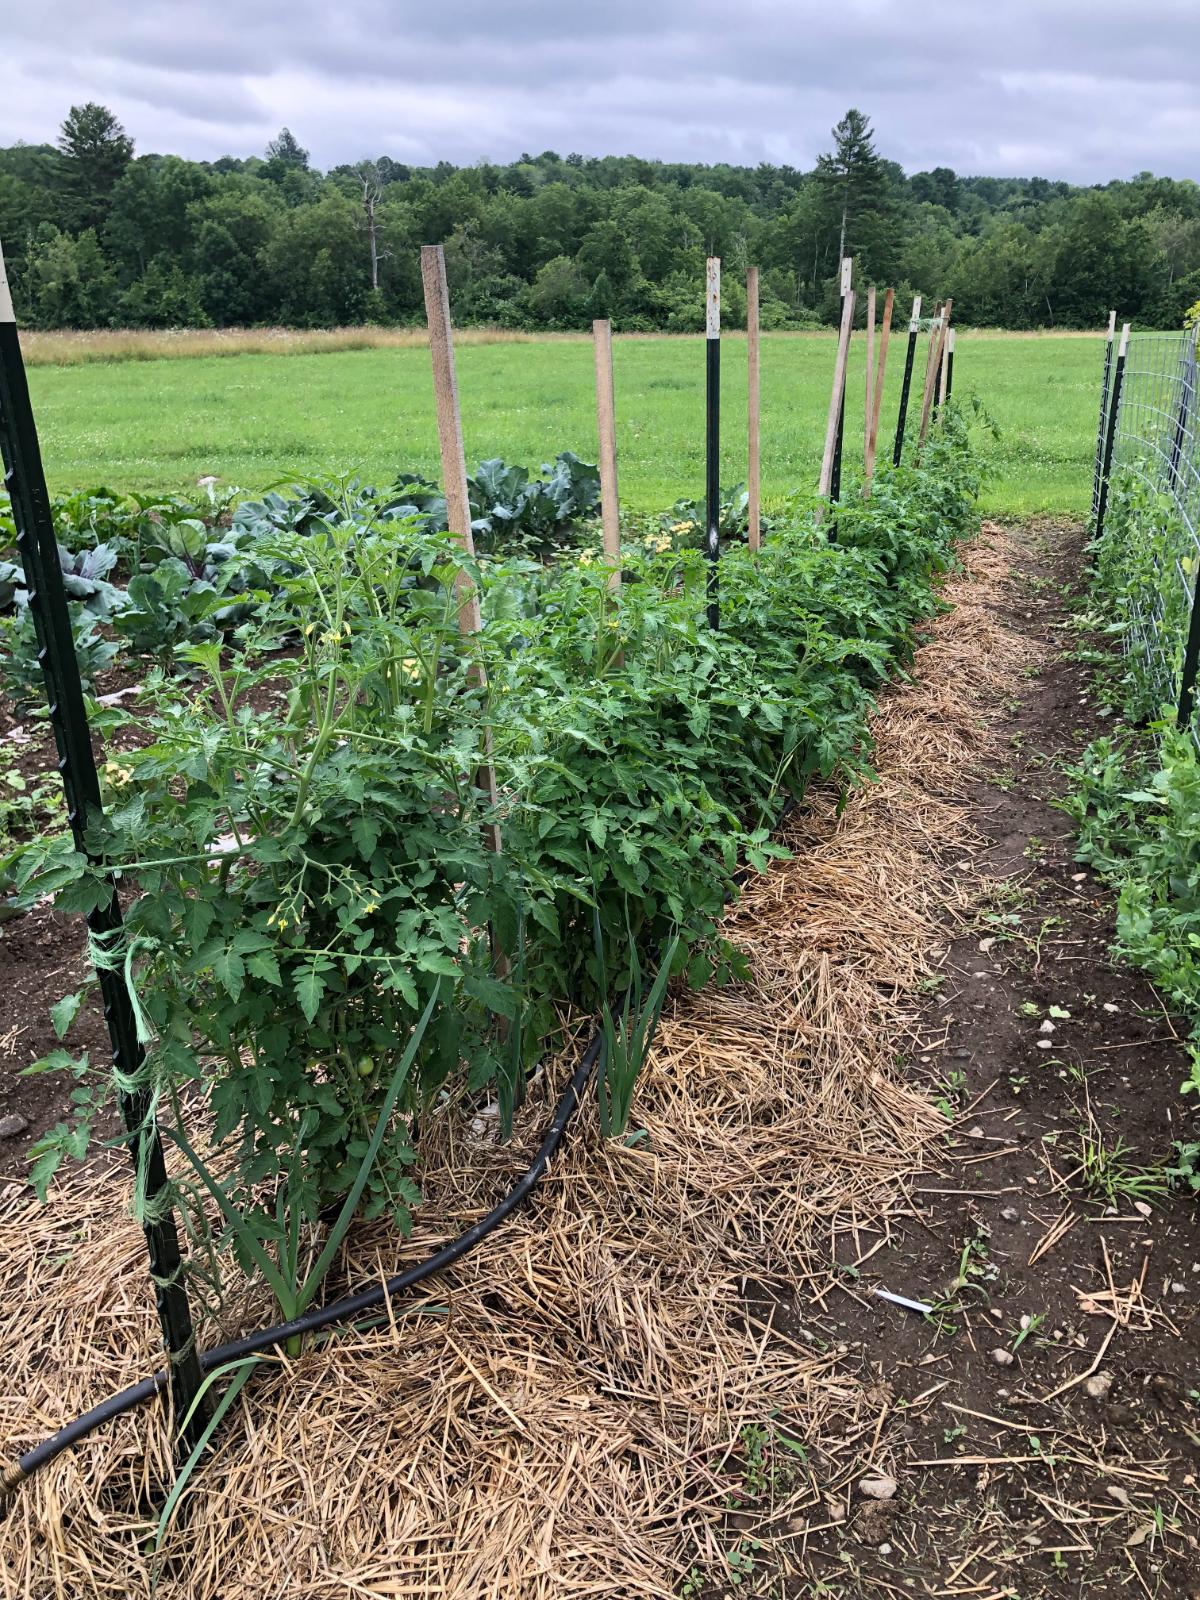 A tomato patch mulched with straw and with a soaker hose at plant bases